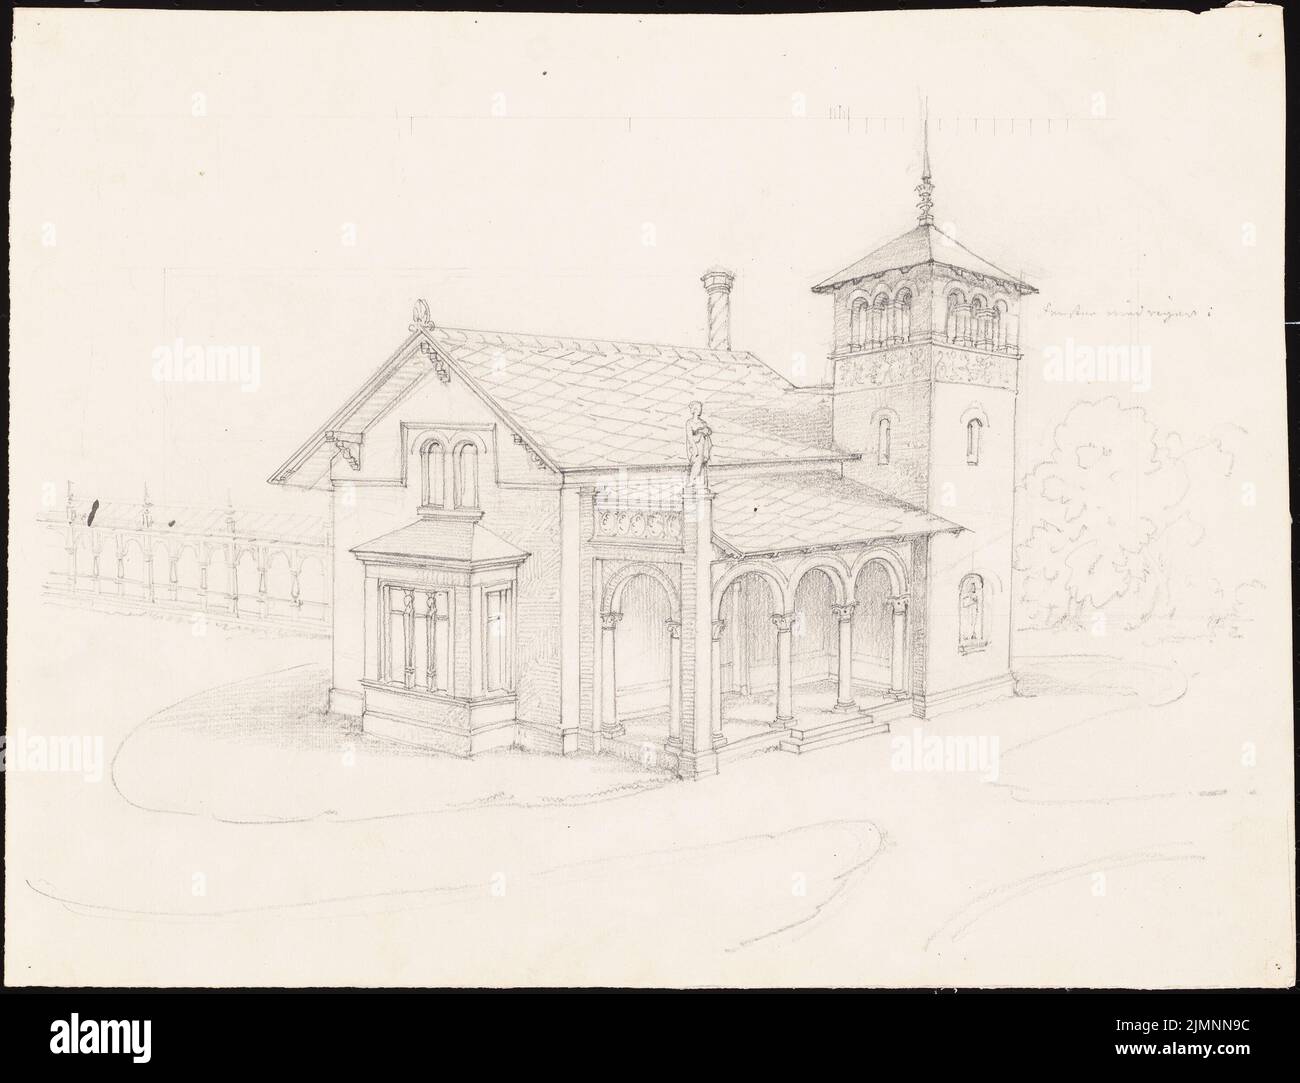 Lüdecke Carl Johann Bogislaw (1826-1894), houses with arbor, tower and pergola (without a year): perspective view. Pencil on cardboard, 29.8 x 39 cm (including scan edges) Lüdecke Carl Johann Bogislaw  (1826-1894): Häuschen mit Laube, Turm und Pergola Stock Photo